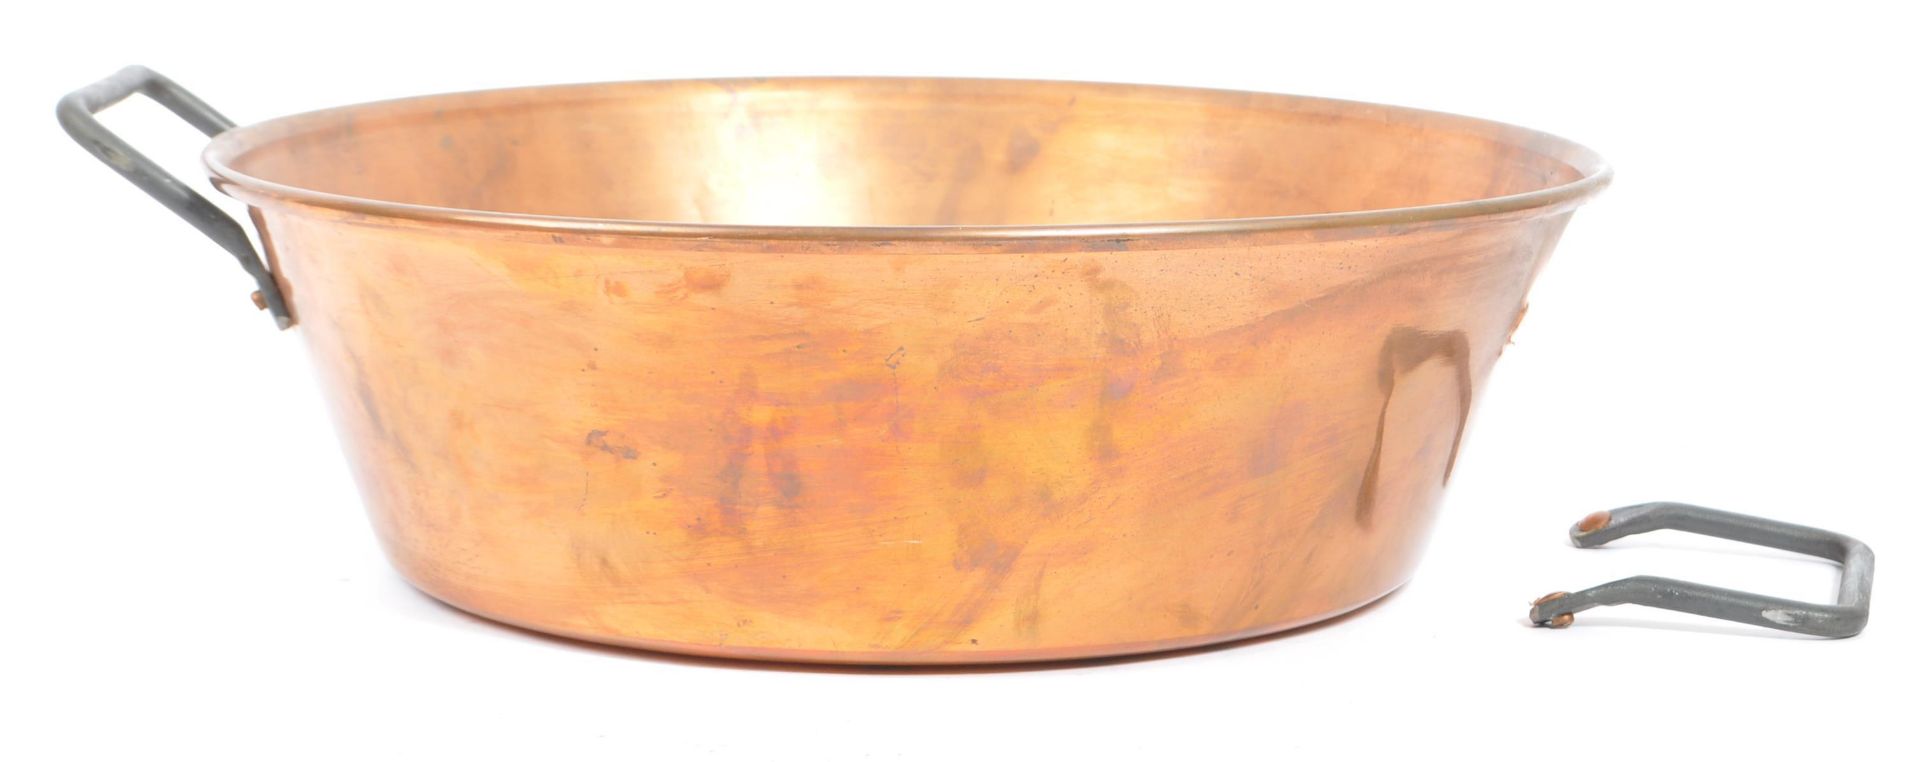 COLLECTION OF 20TH CENTURY COPPER ZINC COOKWARE - Image 7 of 7